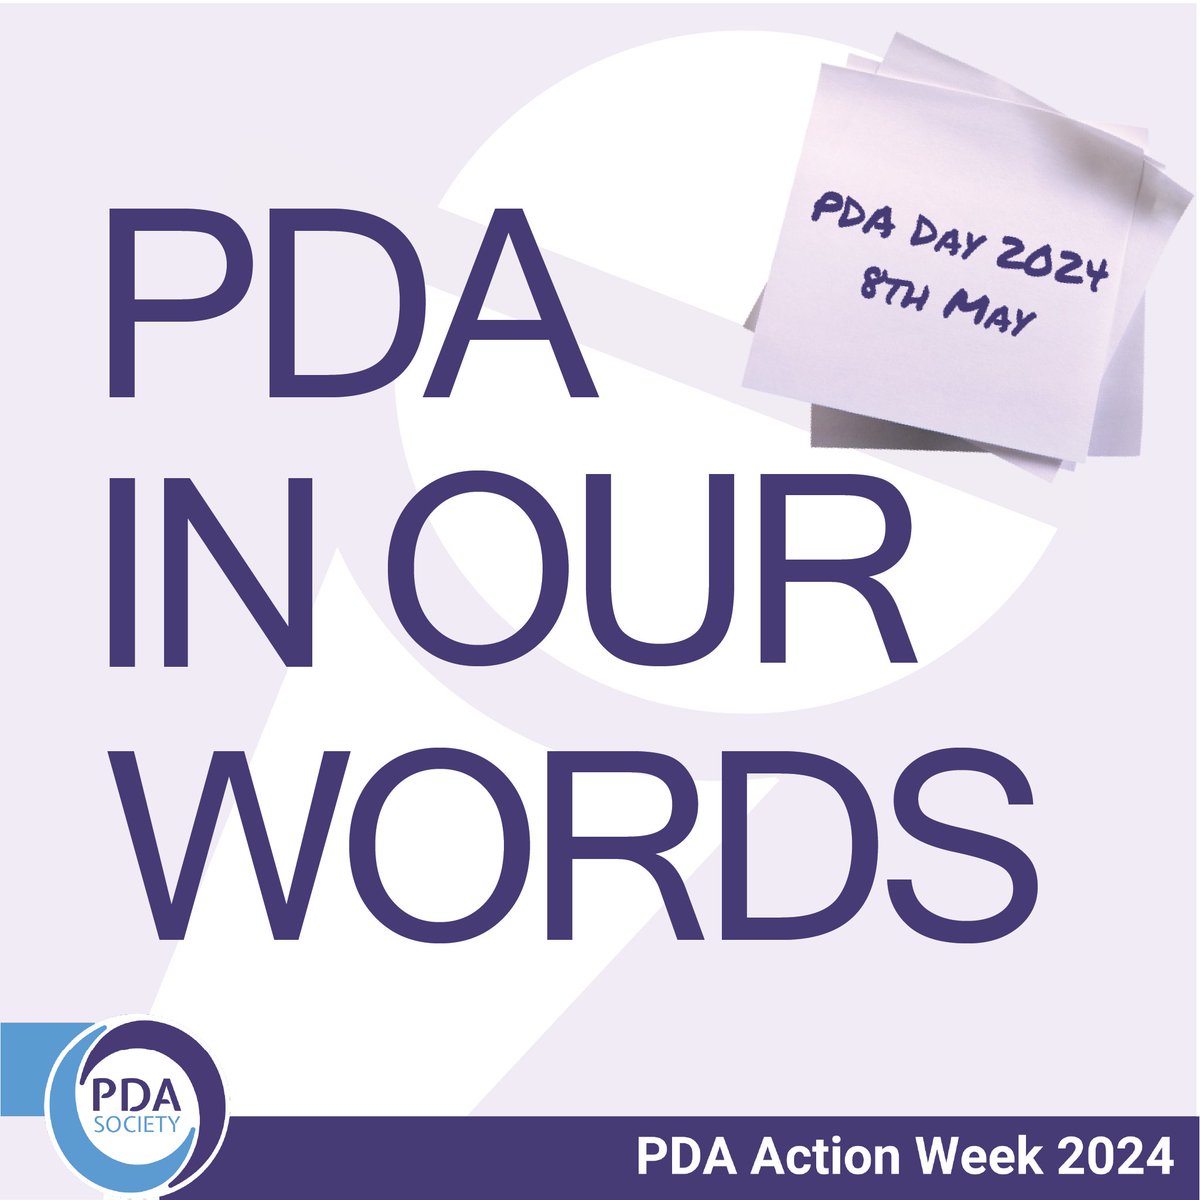 Over the last year we've been conducting new research in partnership with PDA people and their families. Today we have released some of our initial findings alongside what this means for our community: pdasociety.org.uk #PDADay2024 #PDA